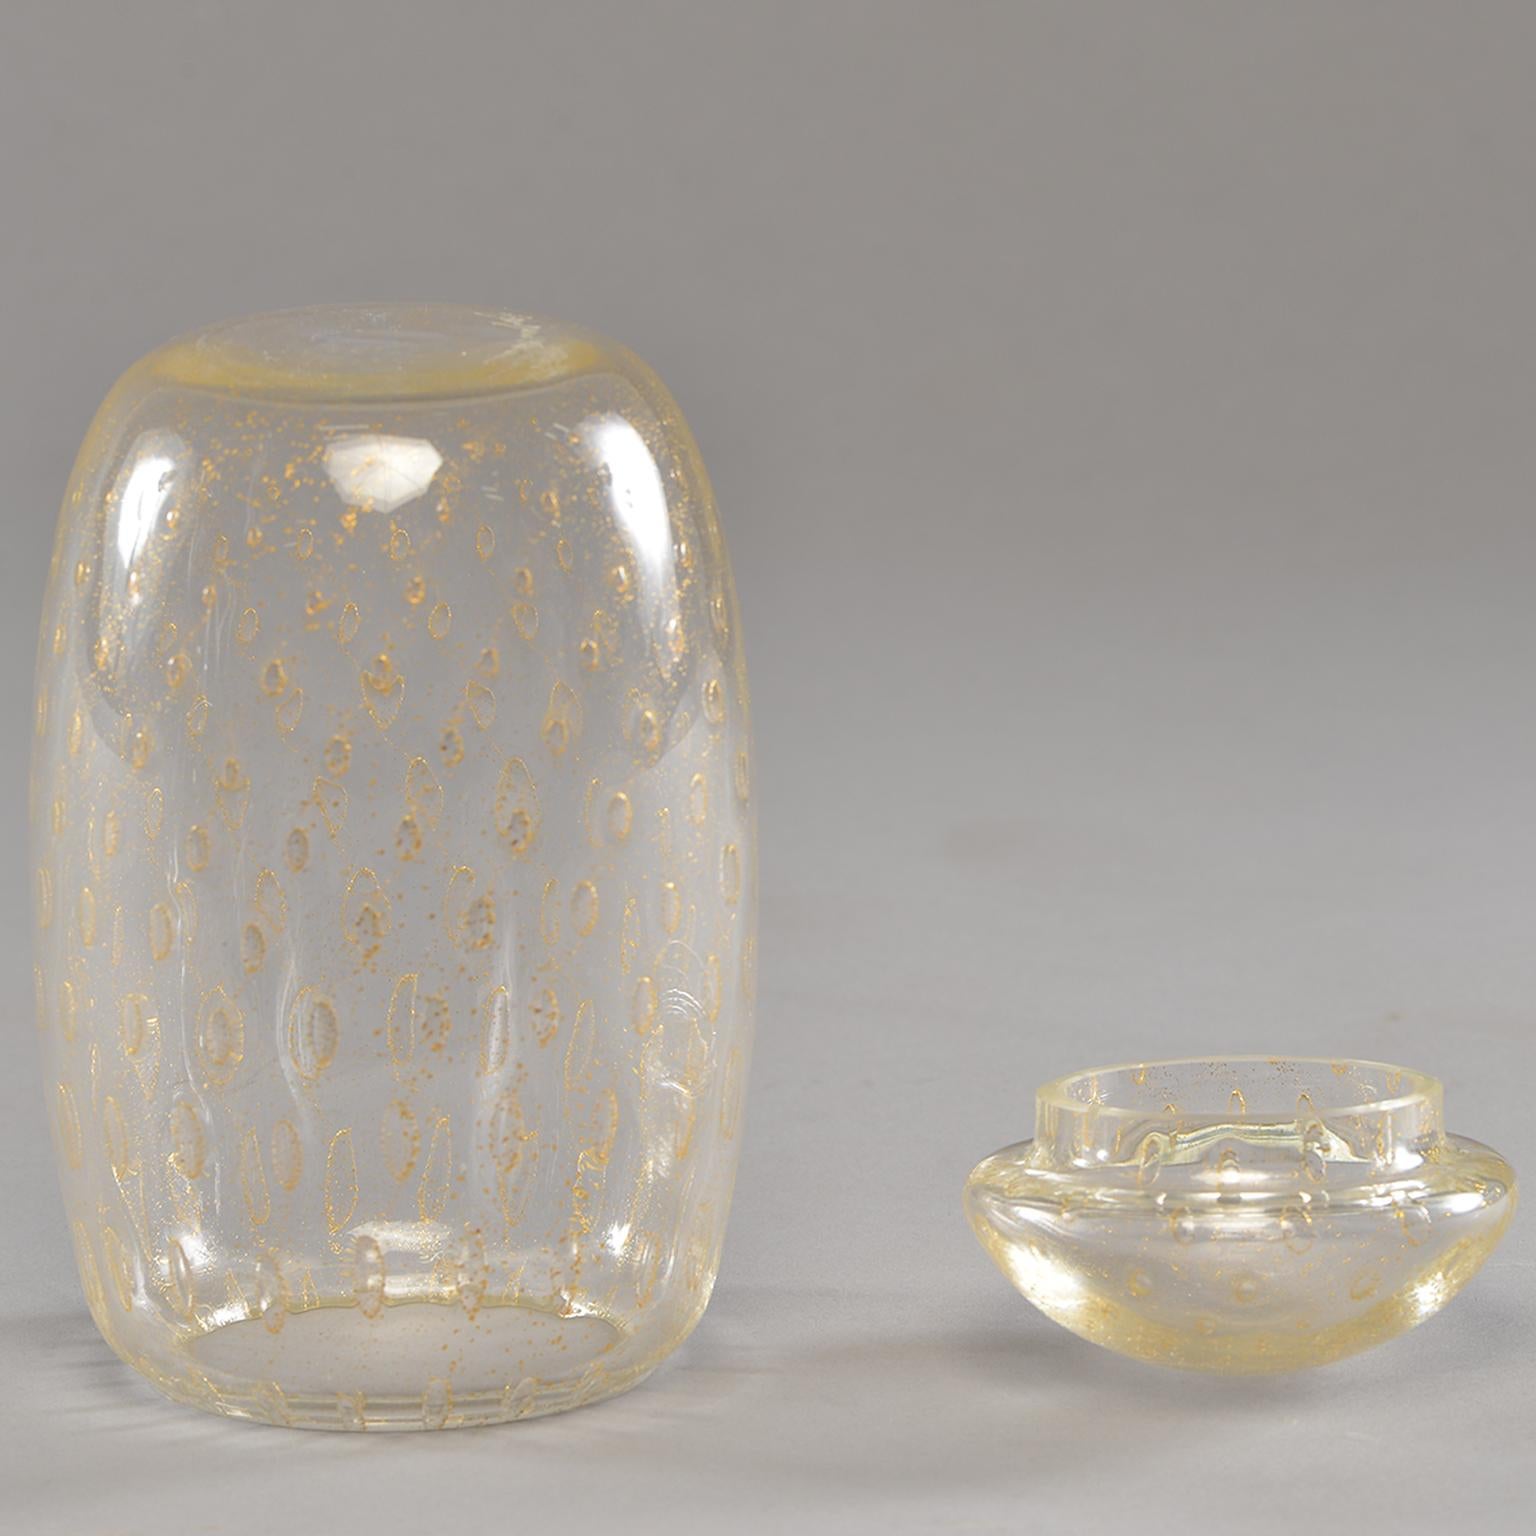 20th Century Midcentury Murano Glass Lidded Vessel with Gold Inclusions For Sale